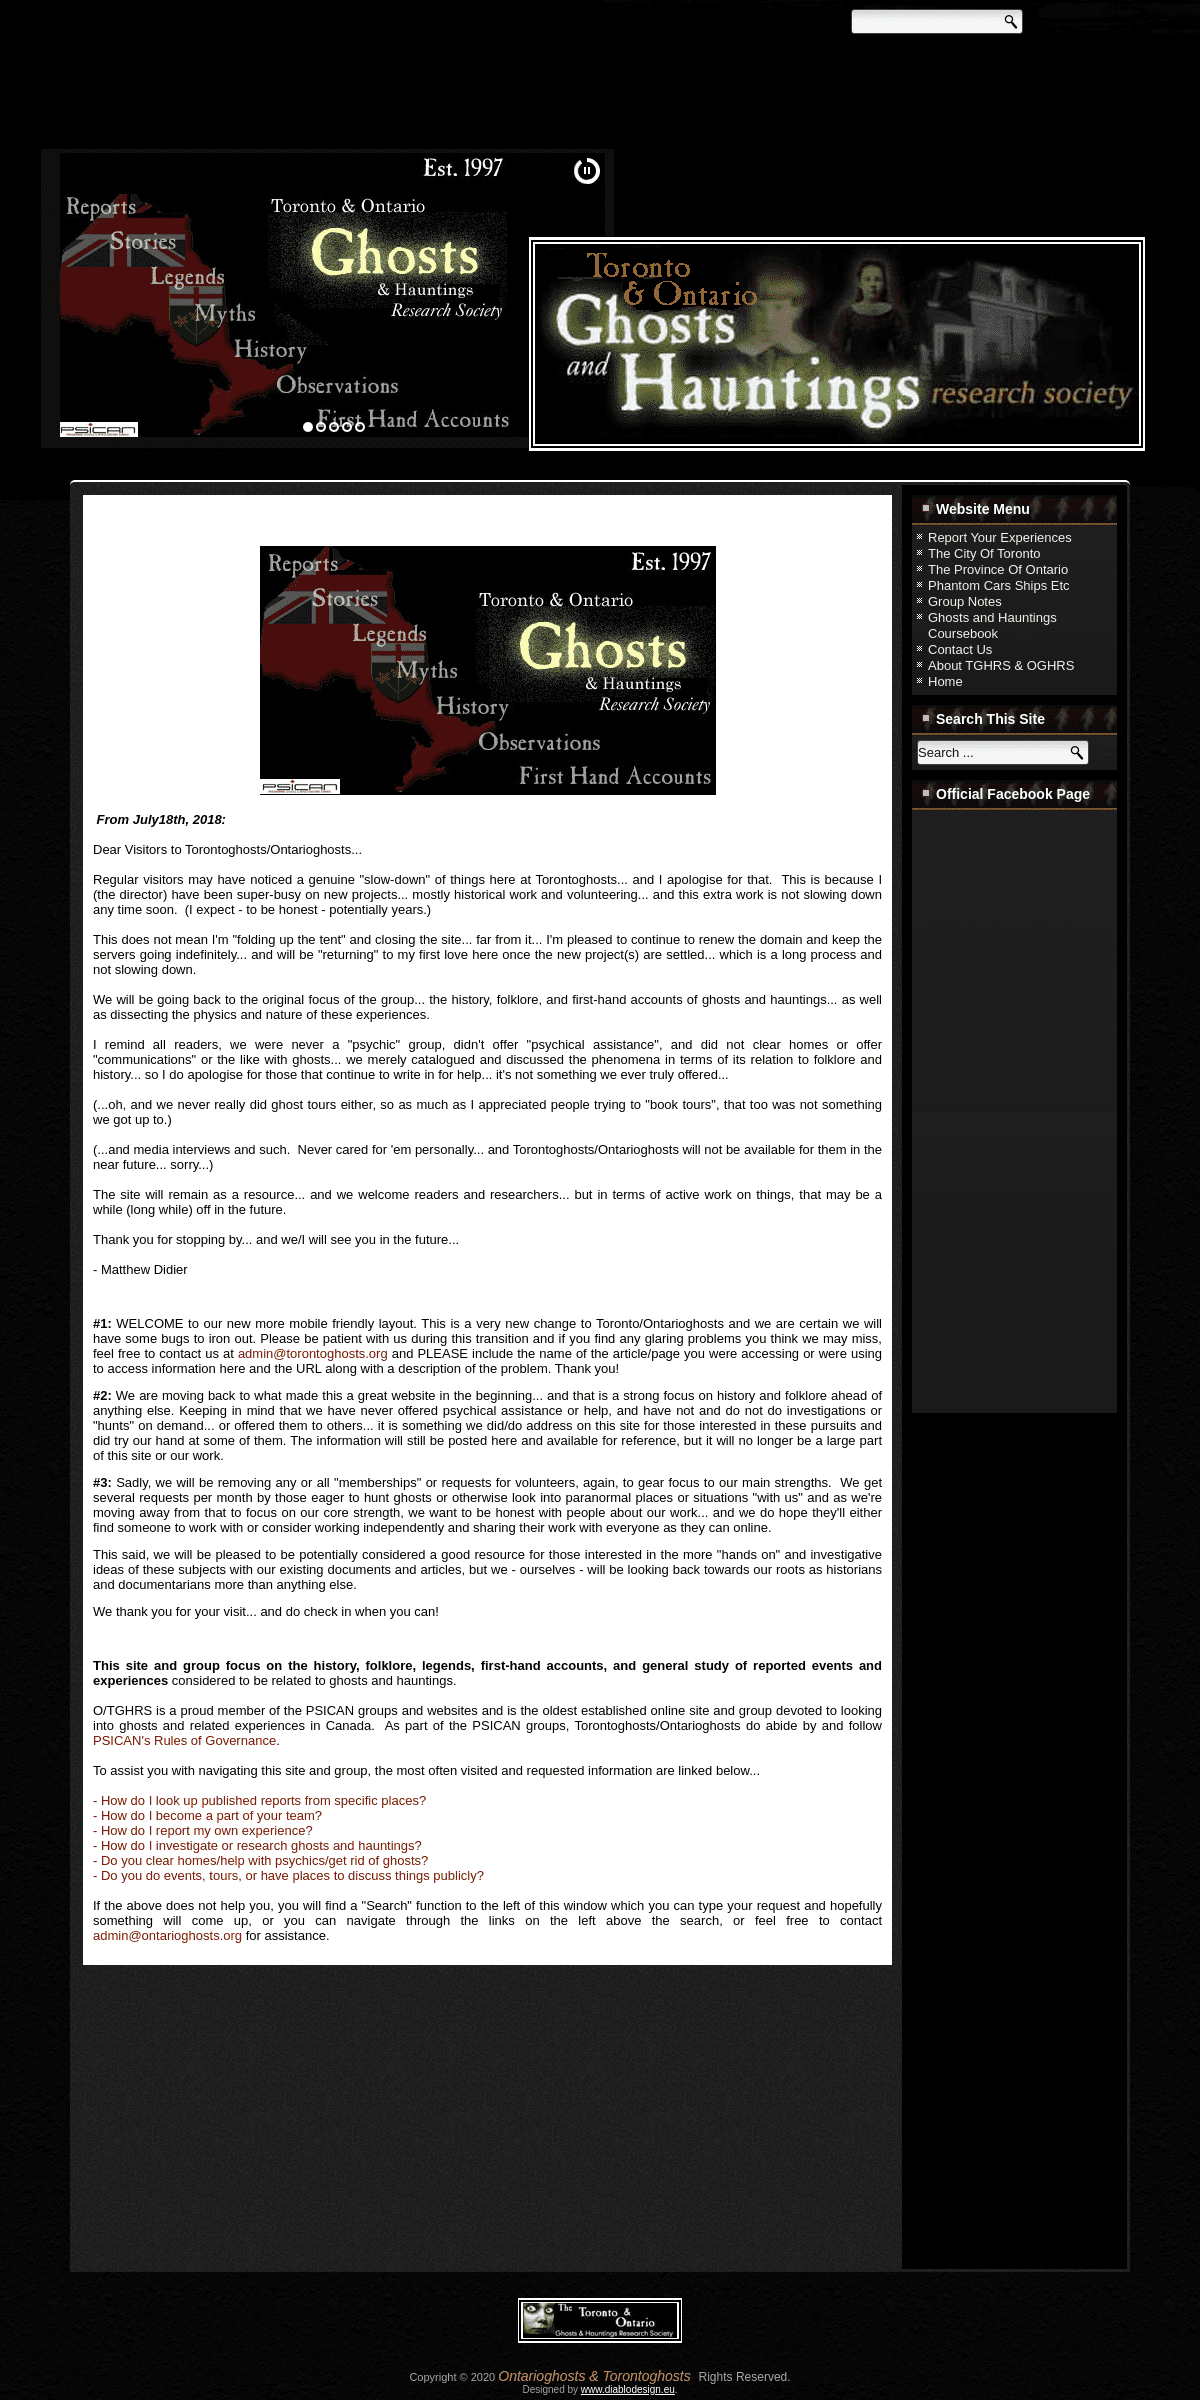 A complete backup of torontoghosts.org